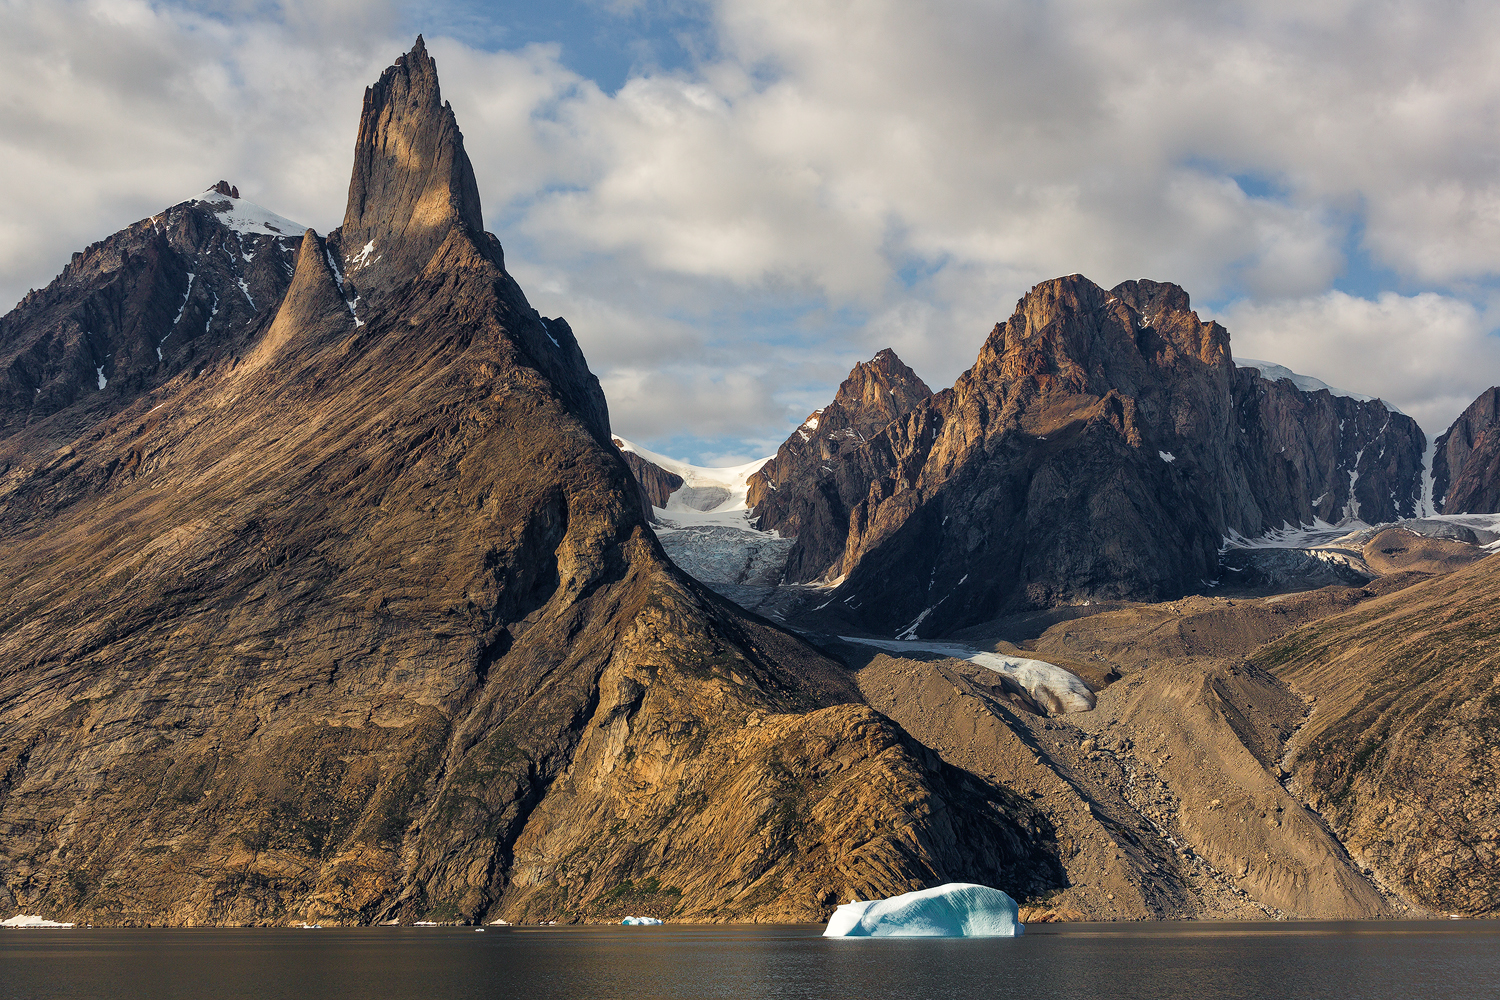 The towering summits of the mountains of Ofjord in East Greenland.